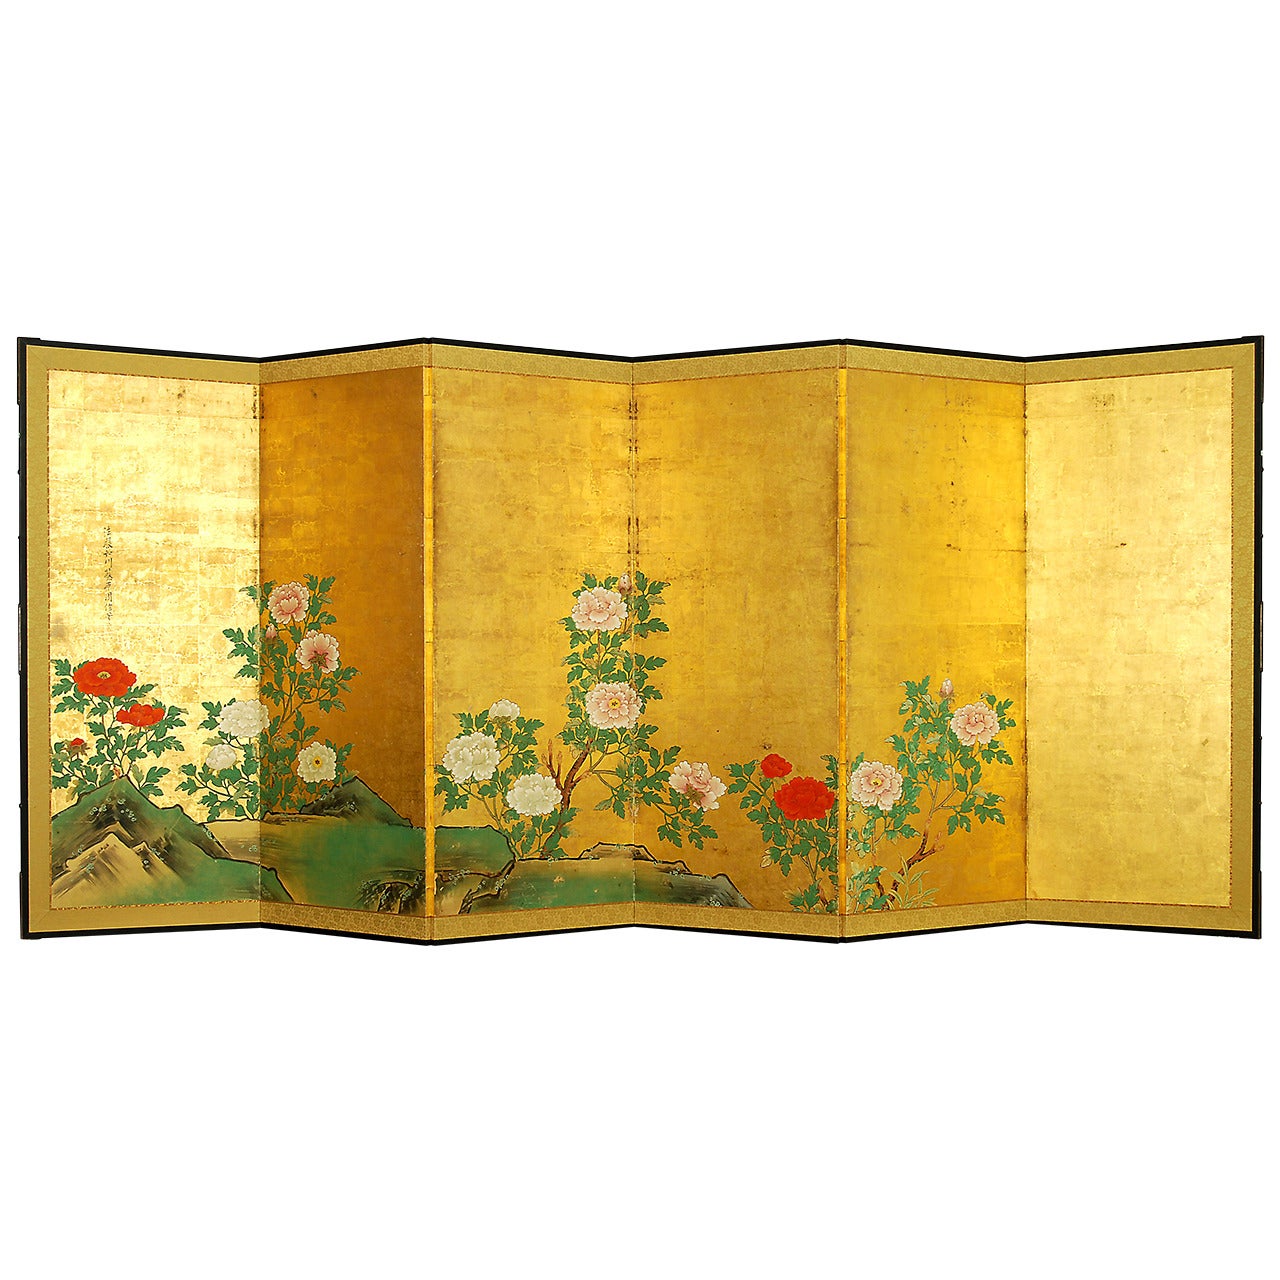 Antique Japanese Six-Panel Screen by Kano Chikanobu For Sale